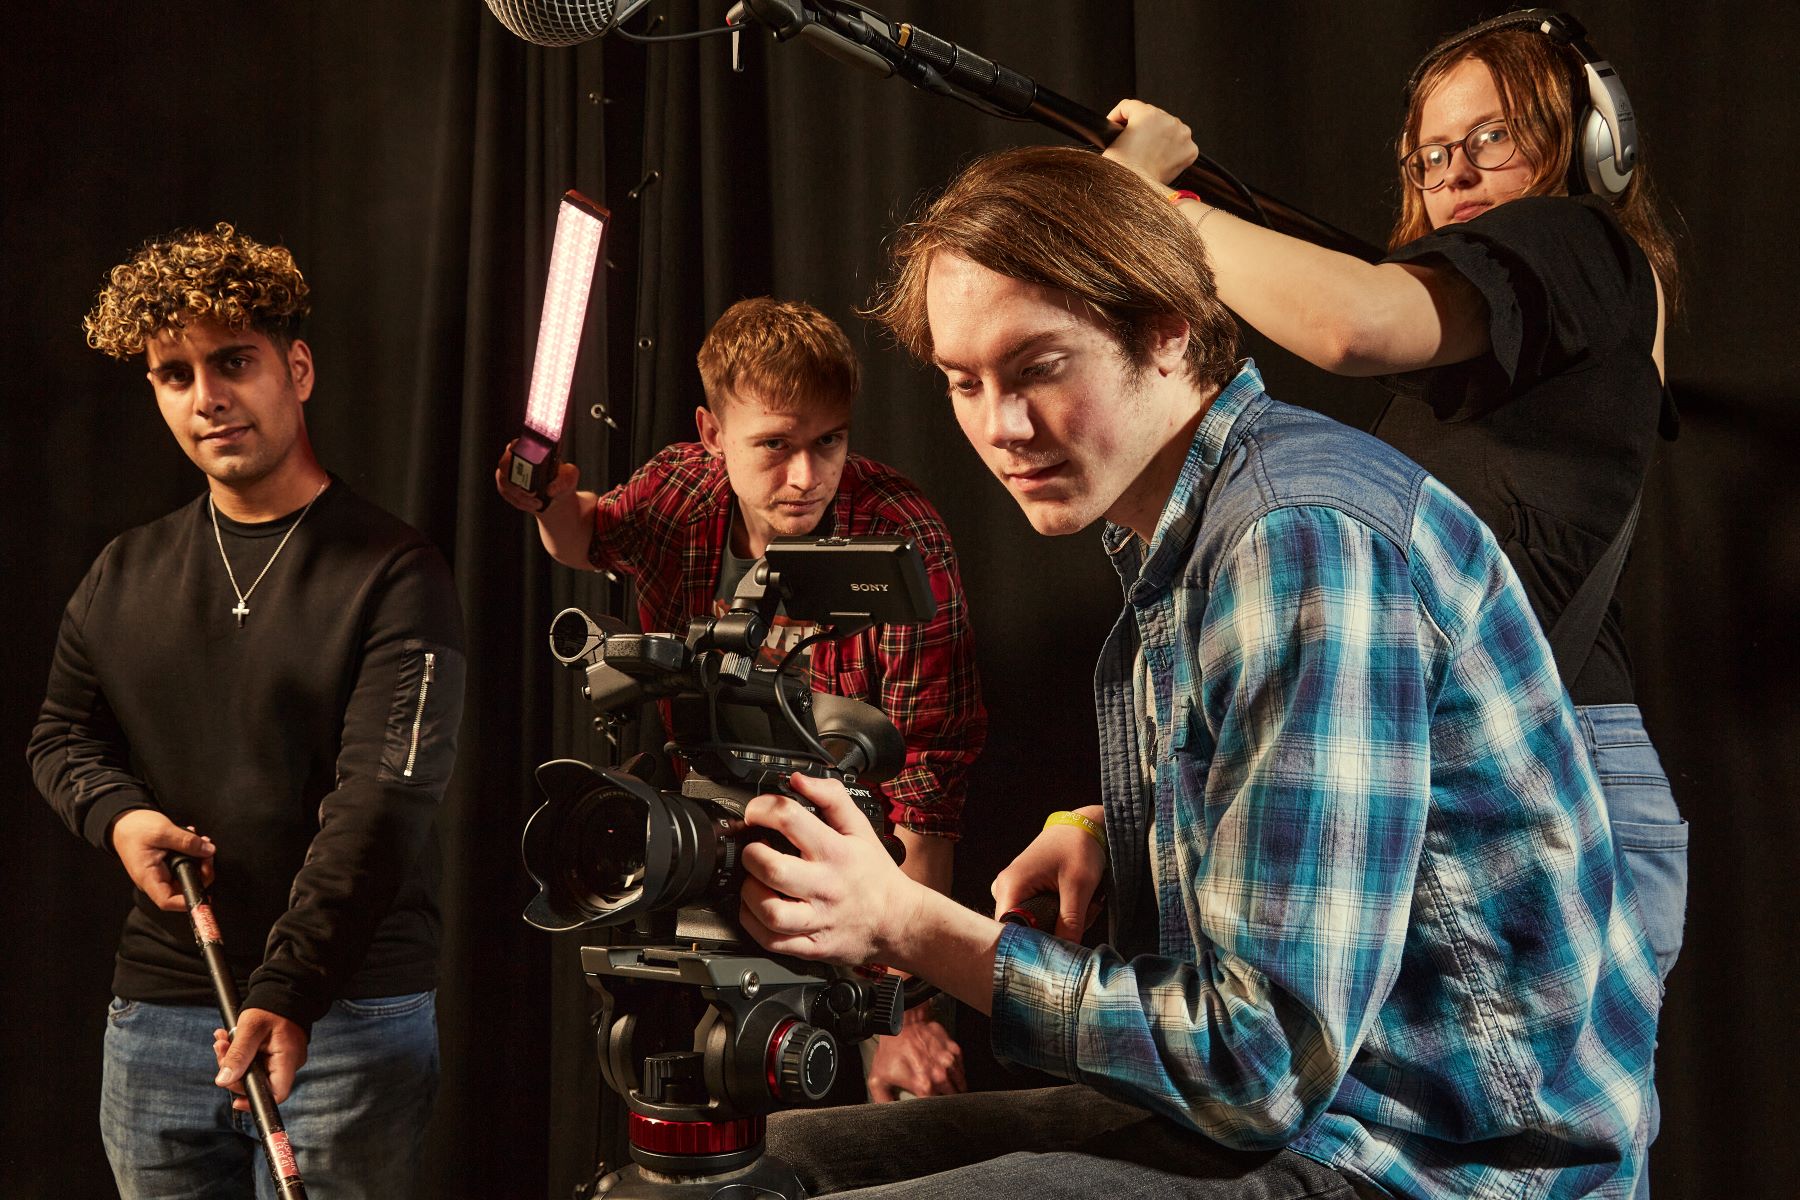 Film students with camera equipment